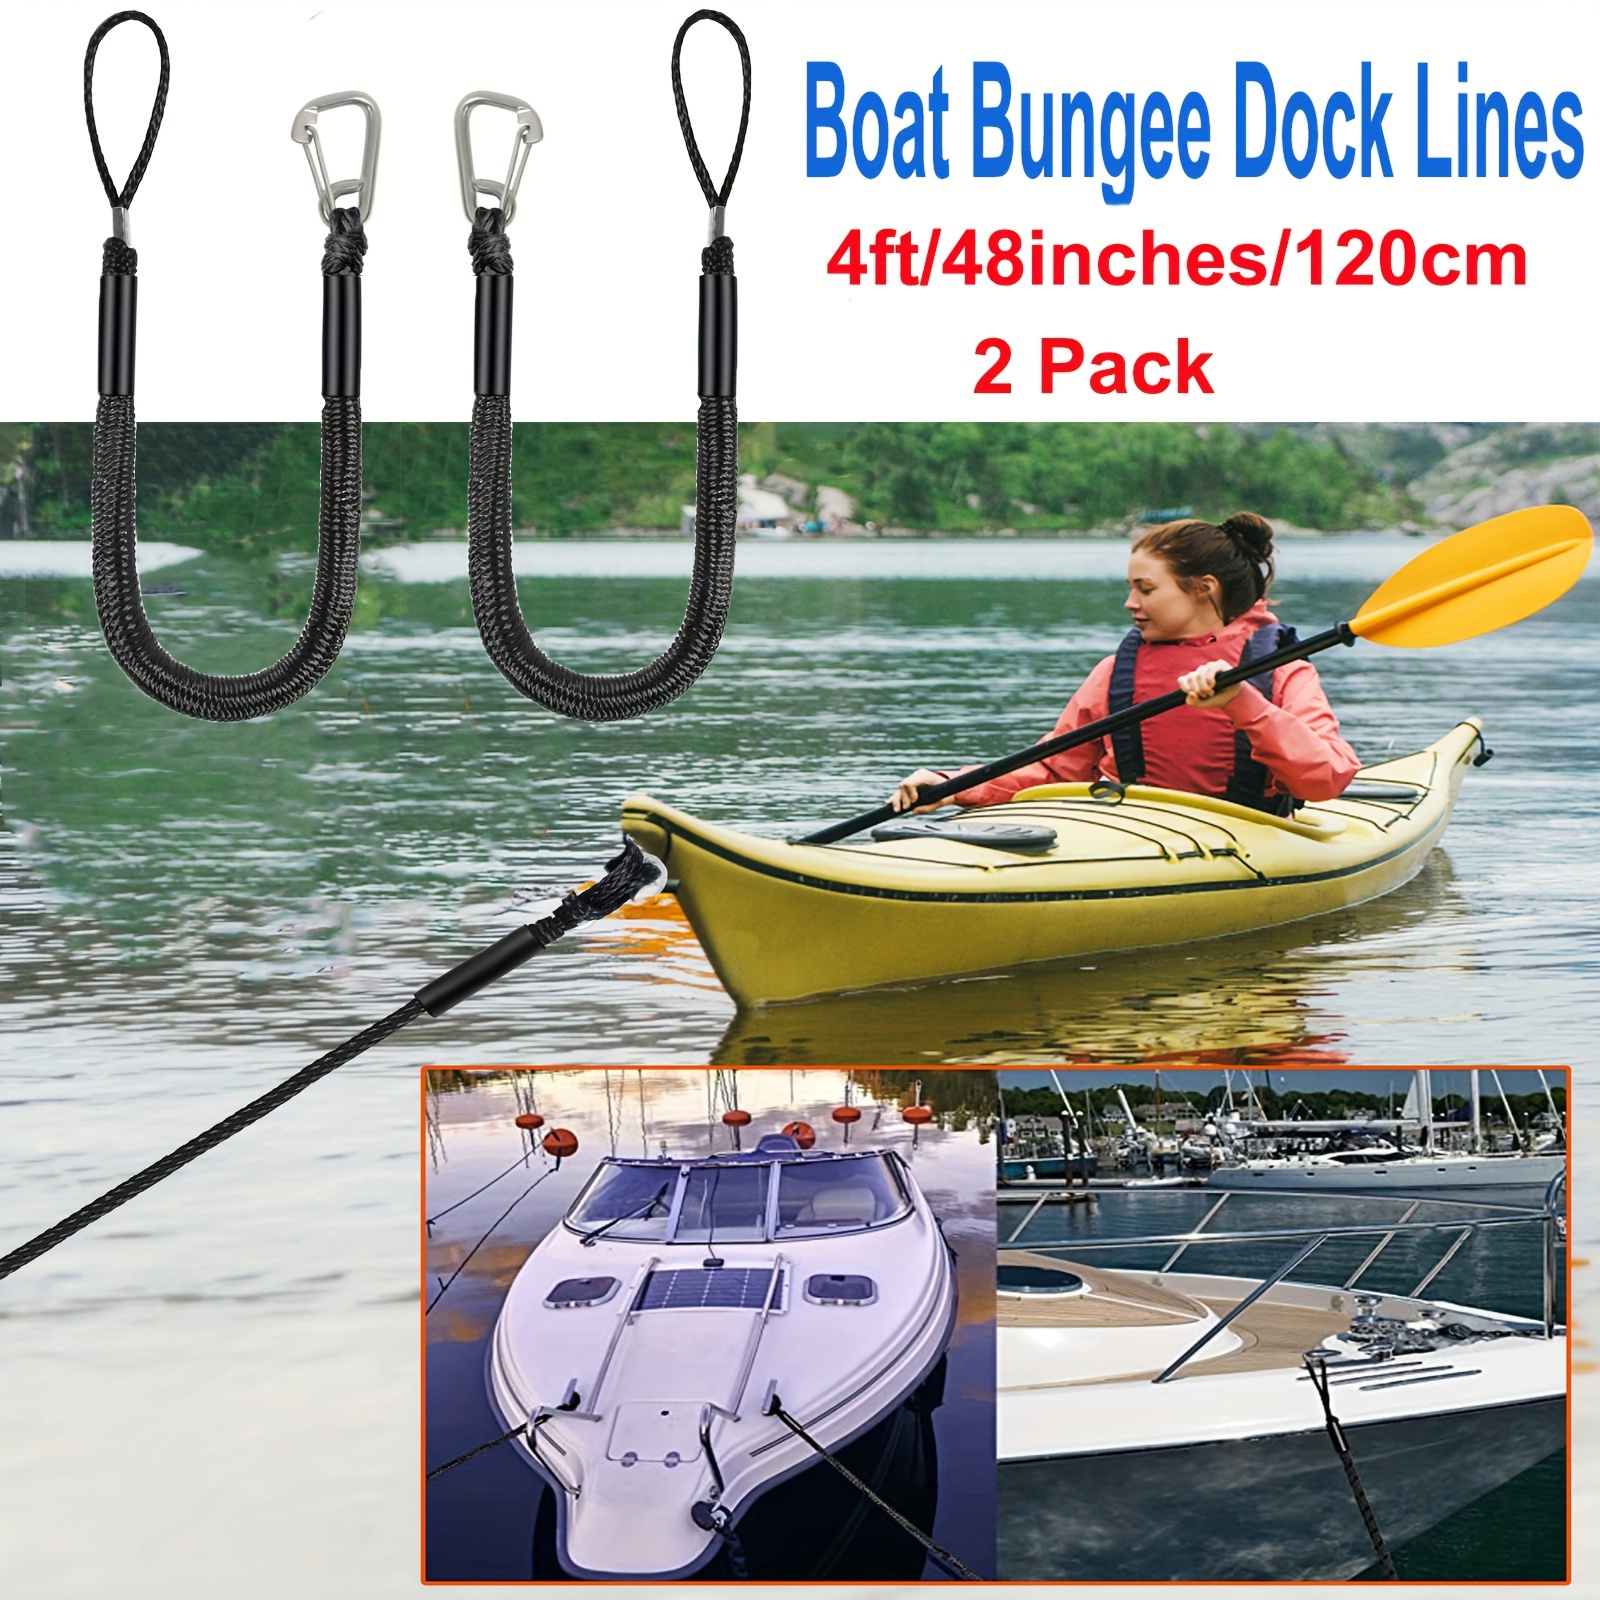 2 Pack Boat Bungee Dock Lines With Stainless Clip Kayak Accessories Shock  Absorption Elastic Mooring Lines For Watercraft Kayak Seadoo Pontoon Bass  Boat Etc 4ft, Don't Miss These Great Deals